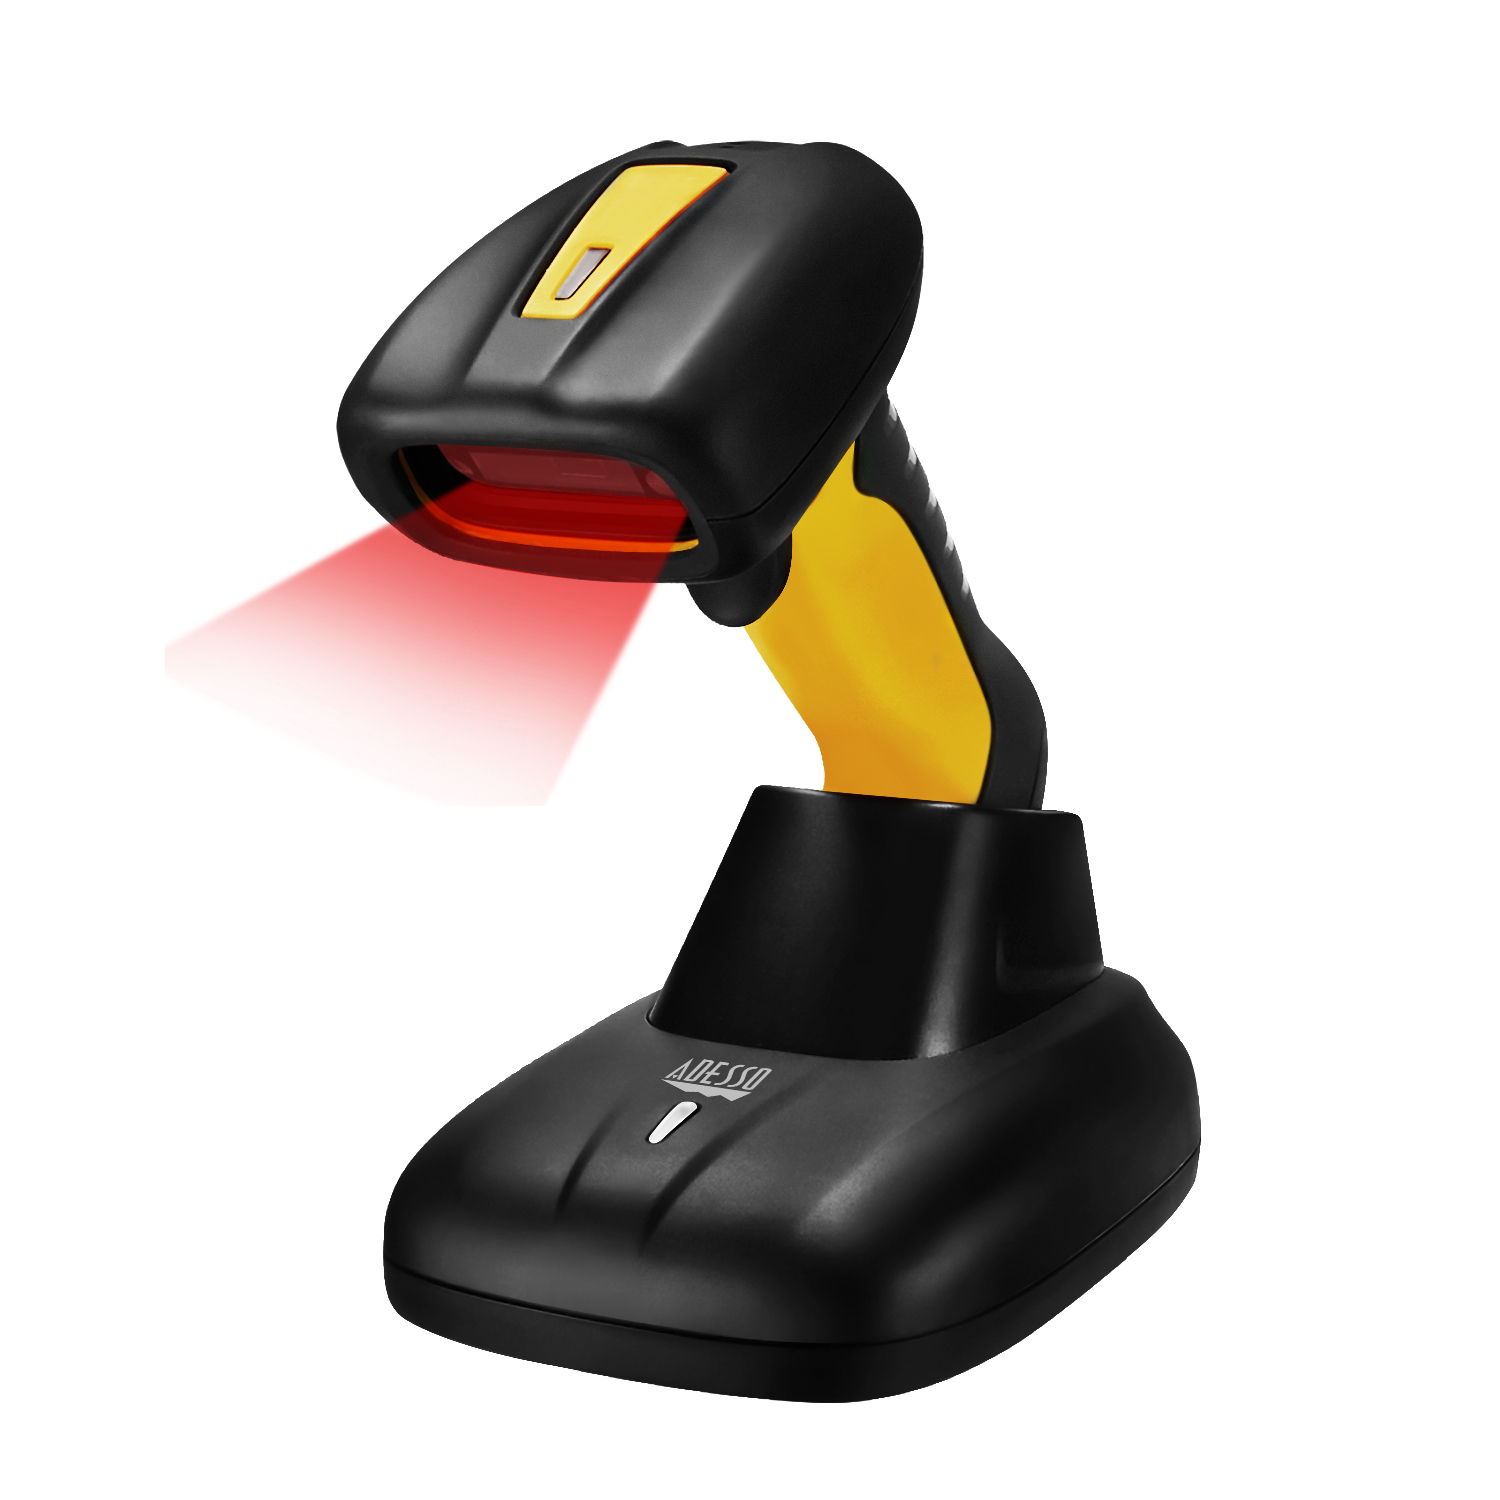 Adesso Handheld Contact Ccd Barcode Scanner Usb For Mac